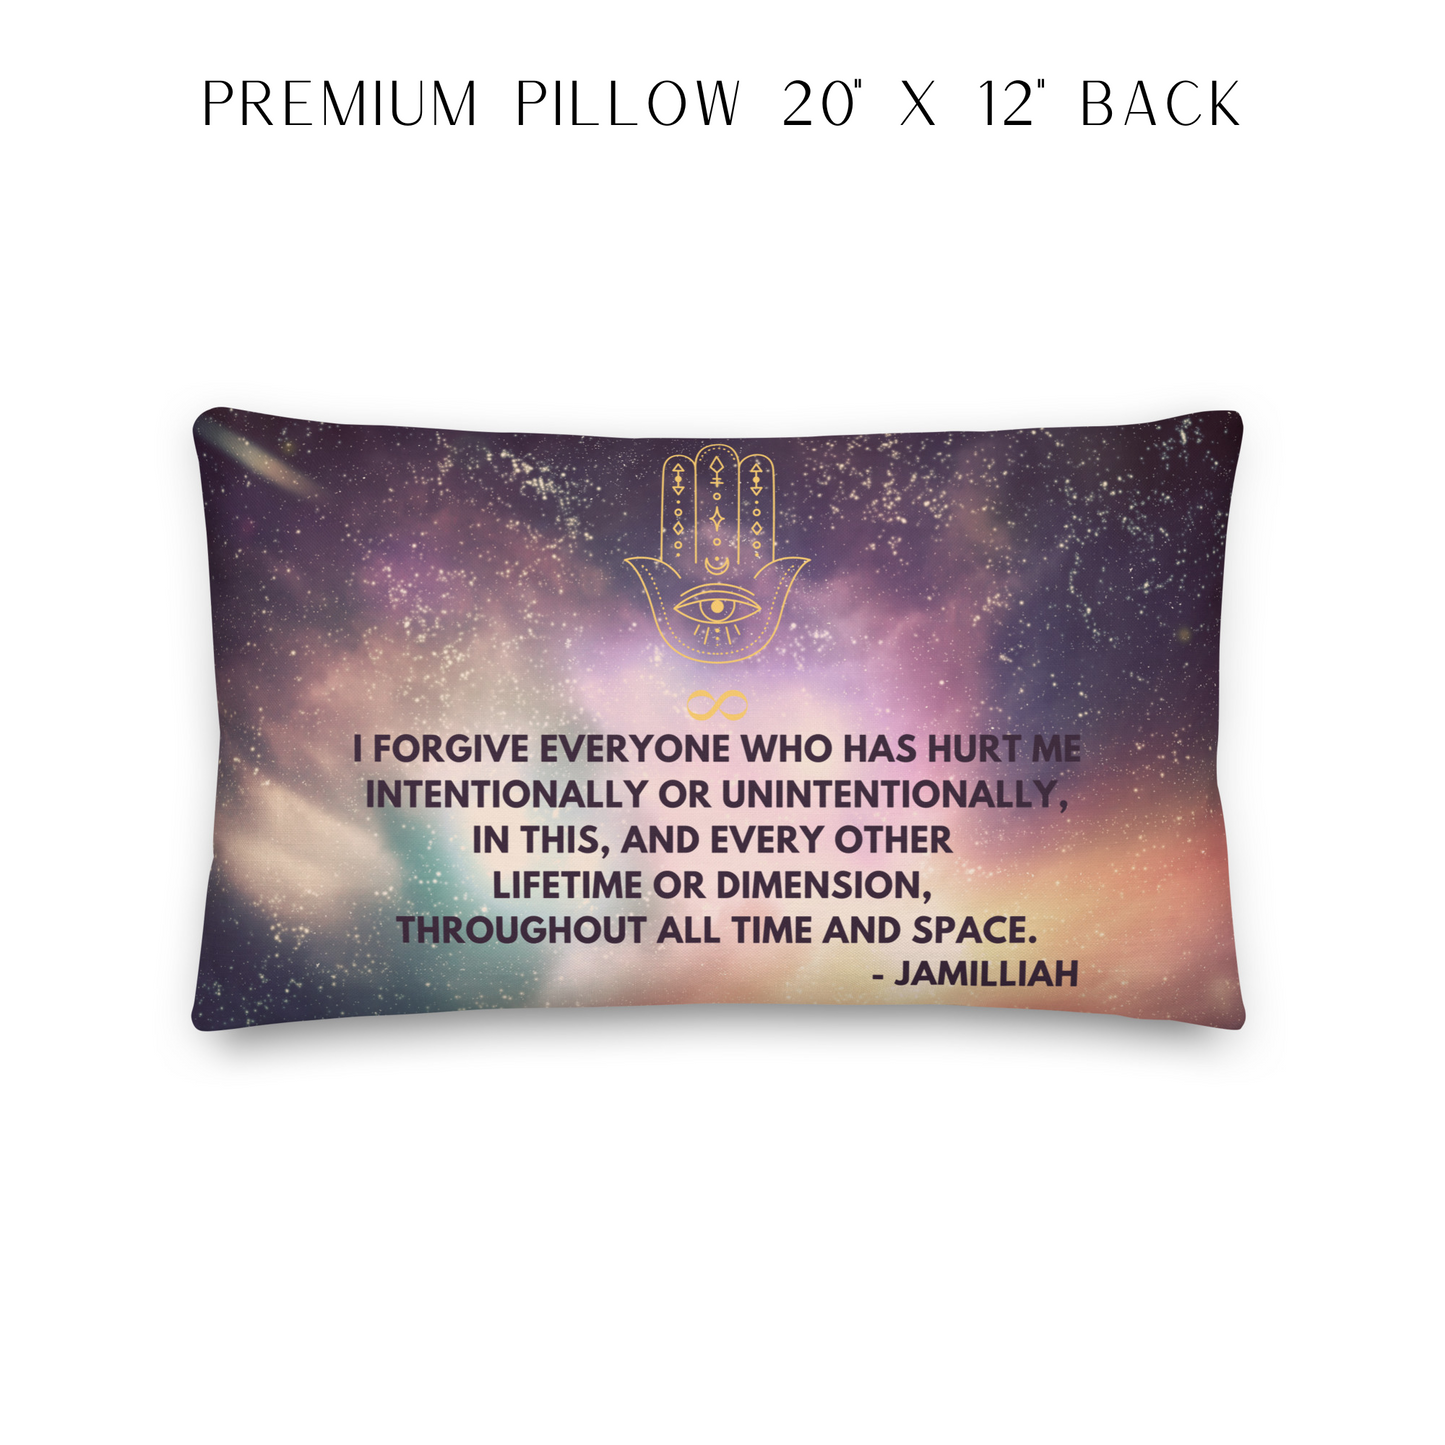 20x12 all-over print premium pillow, back. Case made from 100% pre-shrunk polyester. Machine washable. Hidden zipper w/shape-retaining insert. Purple/green/yellow space/universe/cosmos design. Hamsa hand/infinity sign brand logo. Wise quote mantra/saying/tagline/motto/slogan. "I Forgive Everyone Who Has Hurt Me Intentionally Or Unintentionally, In This, And Every Other Lifetime Or Dimension, Throughout All Time And Space. - Jamilliah." - JAMILLIAH'S WISDOM IS TIMELESS SHOP - wisdomistimeless.com.